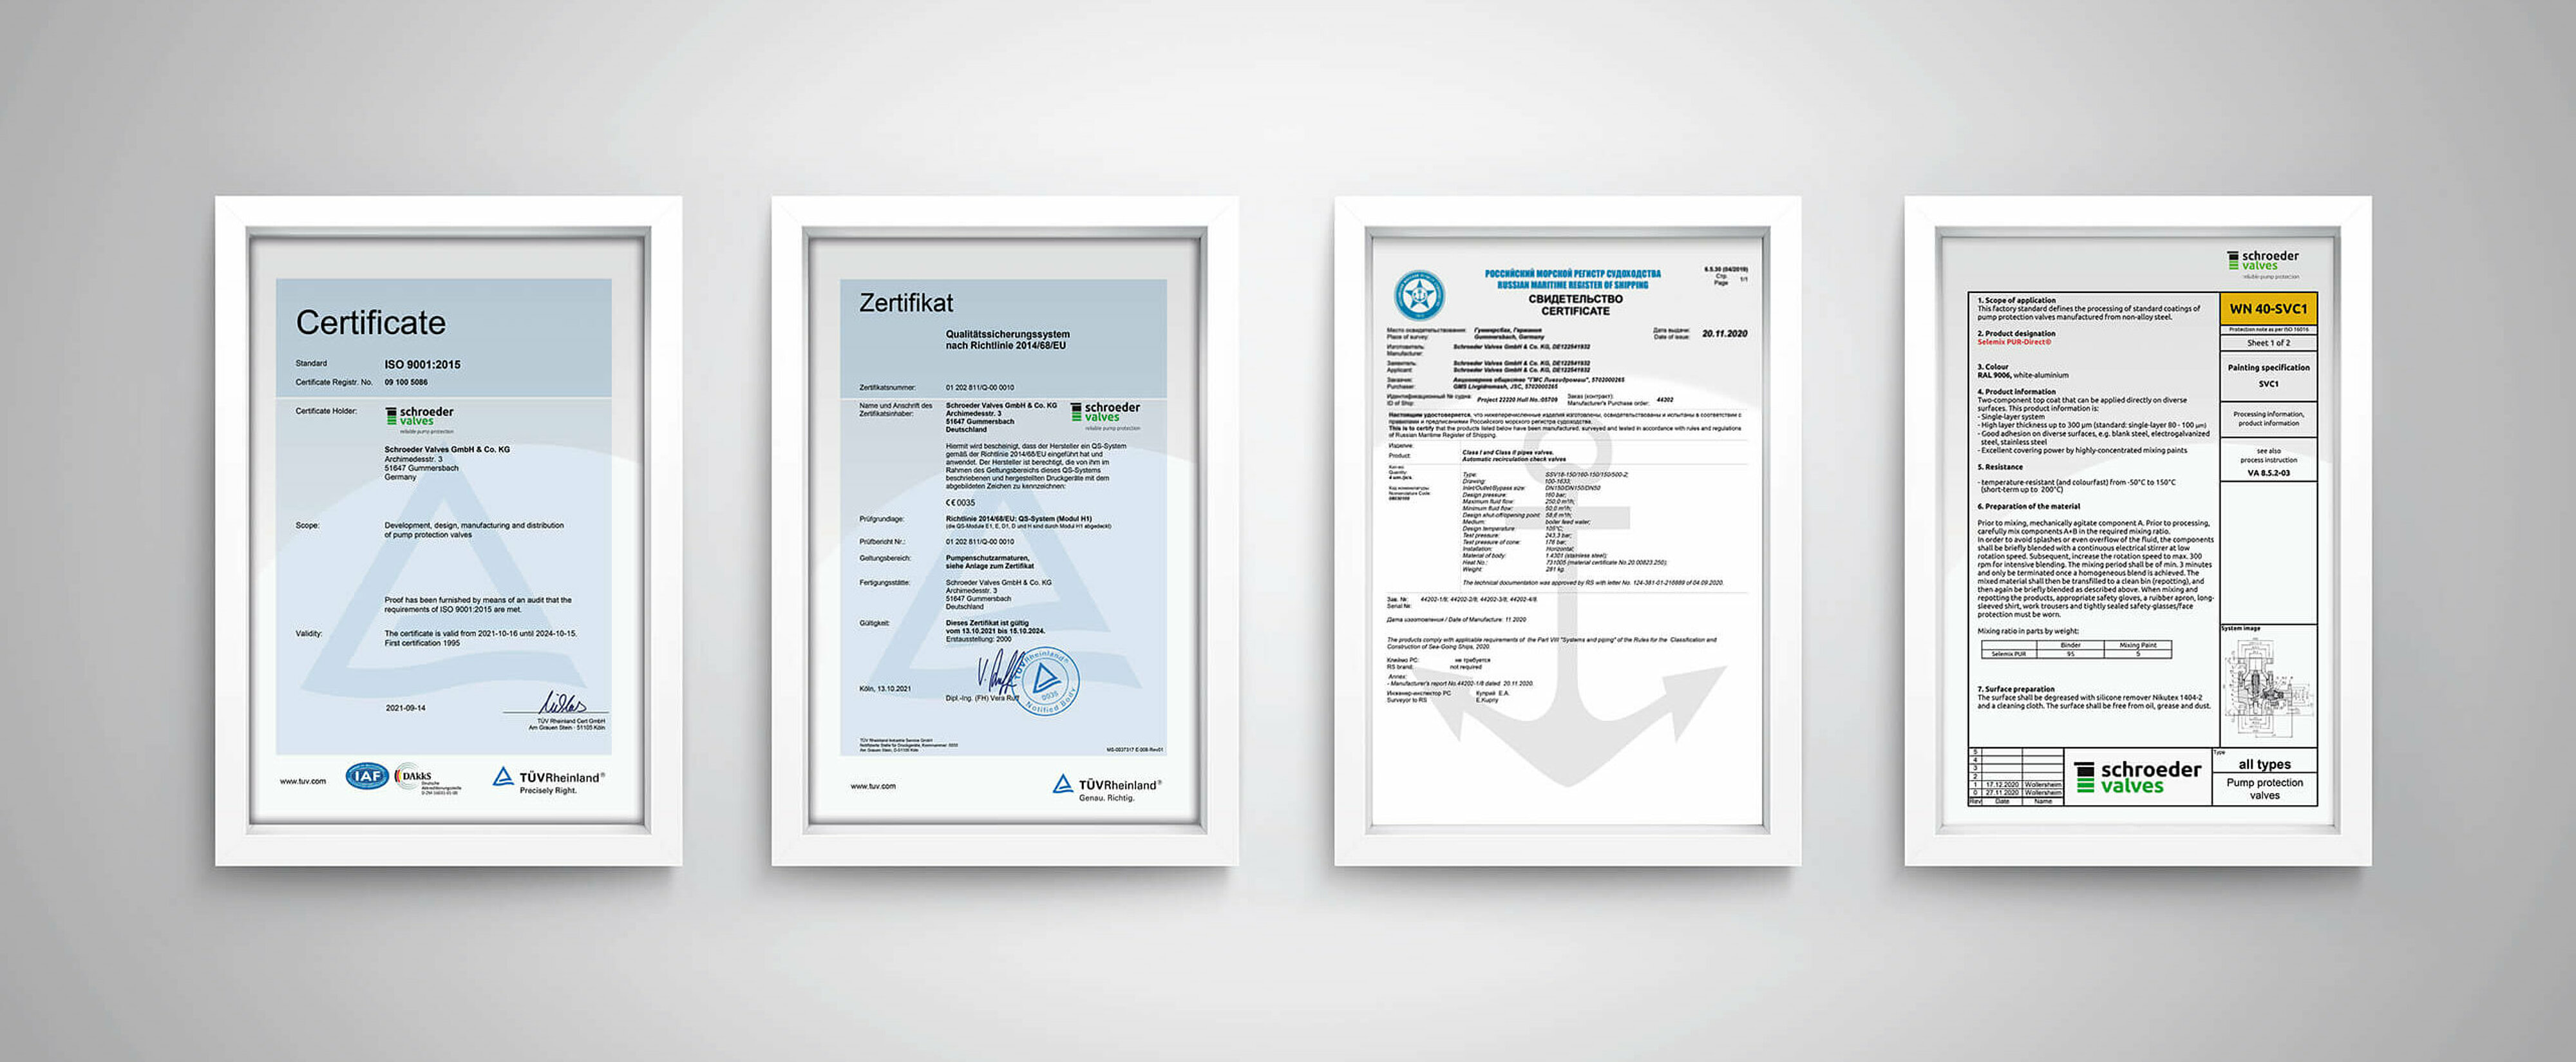 Image composition of the certificates from Schroeder Valves